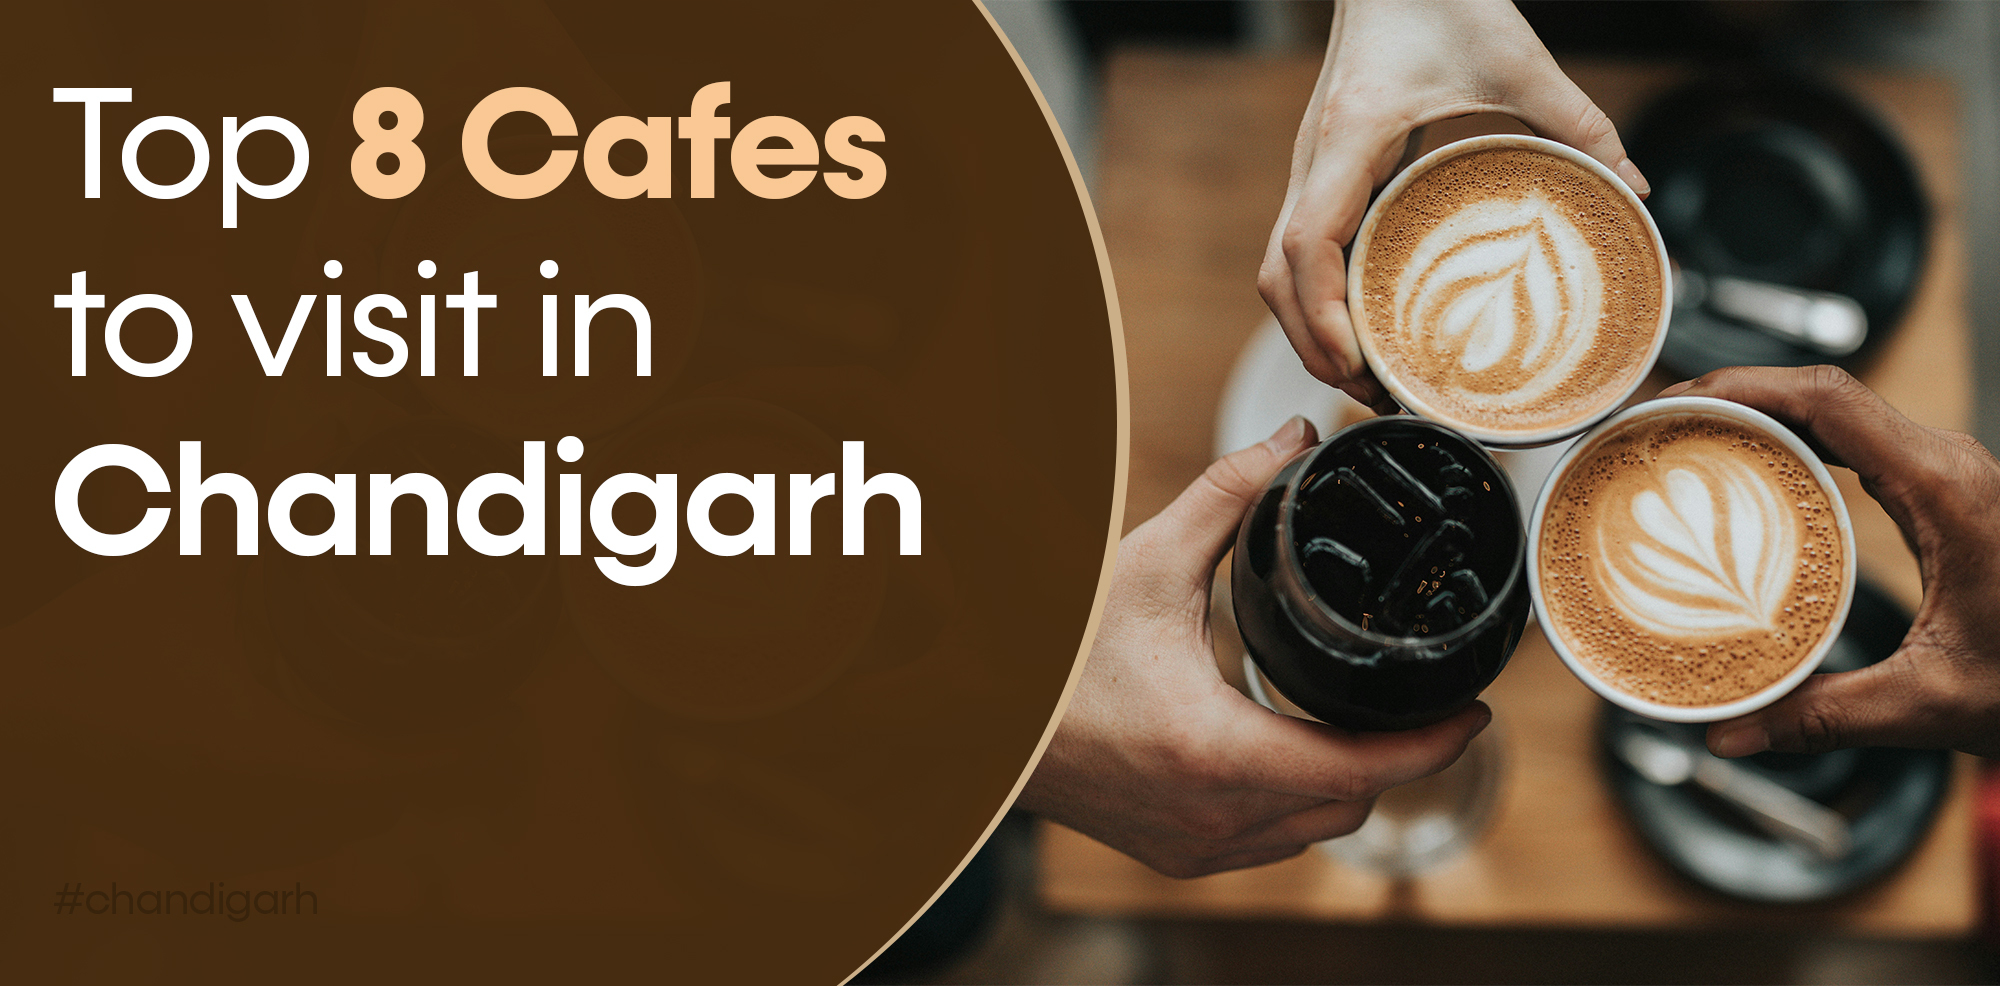 Top 8 cafes to visit in Chandigarh